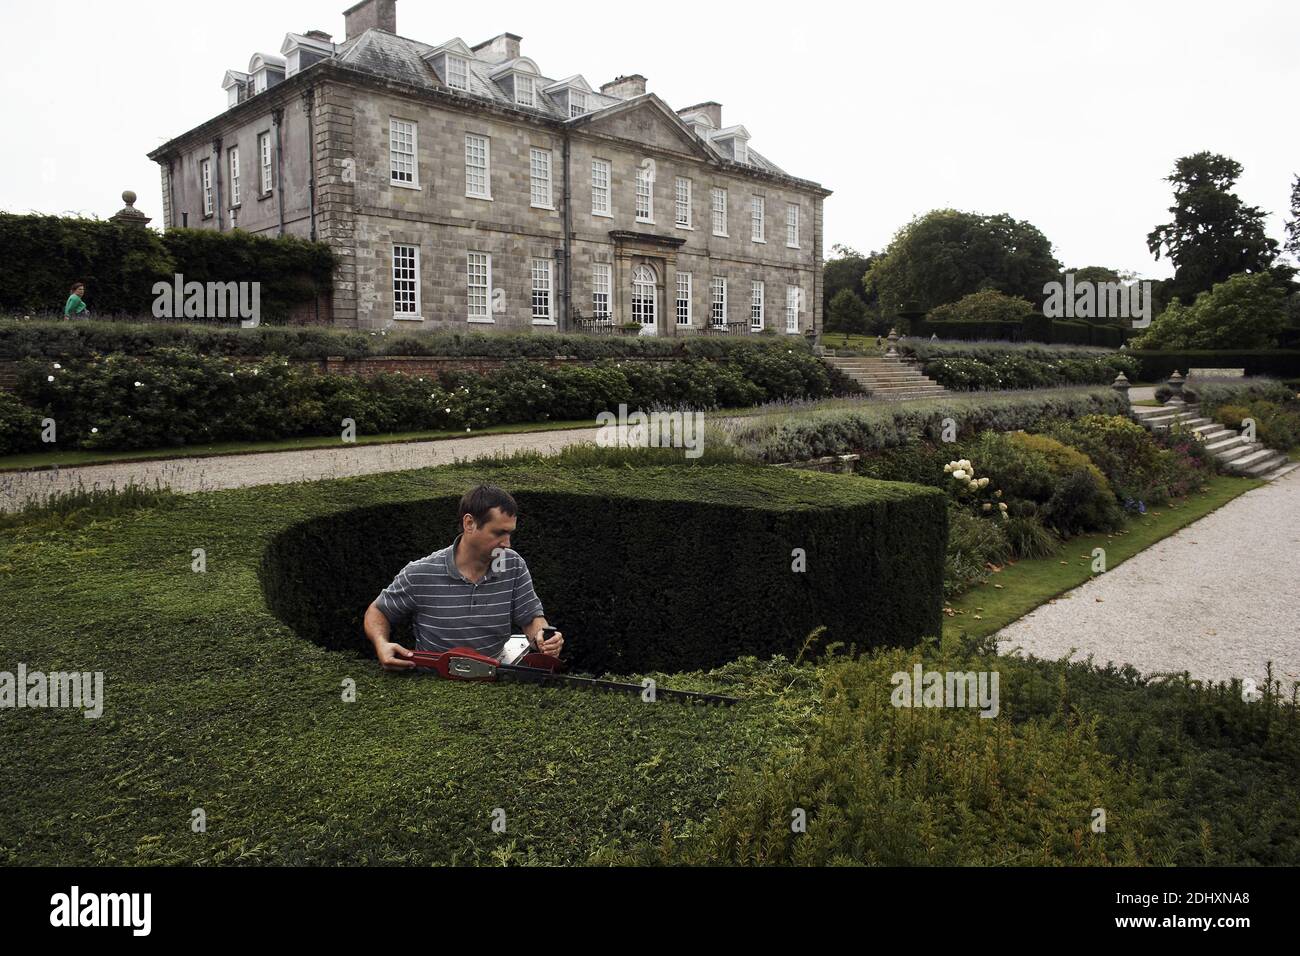 Gardener cuts the yew hedge in the formal gardens of this 18c mansion with electric hedge trimmer at Antony House, Torpoint, Cornwall, UK Stock Photo